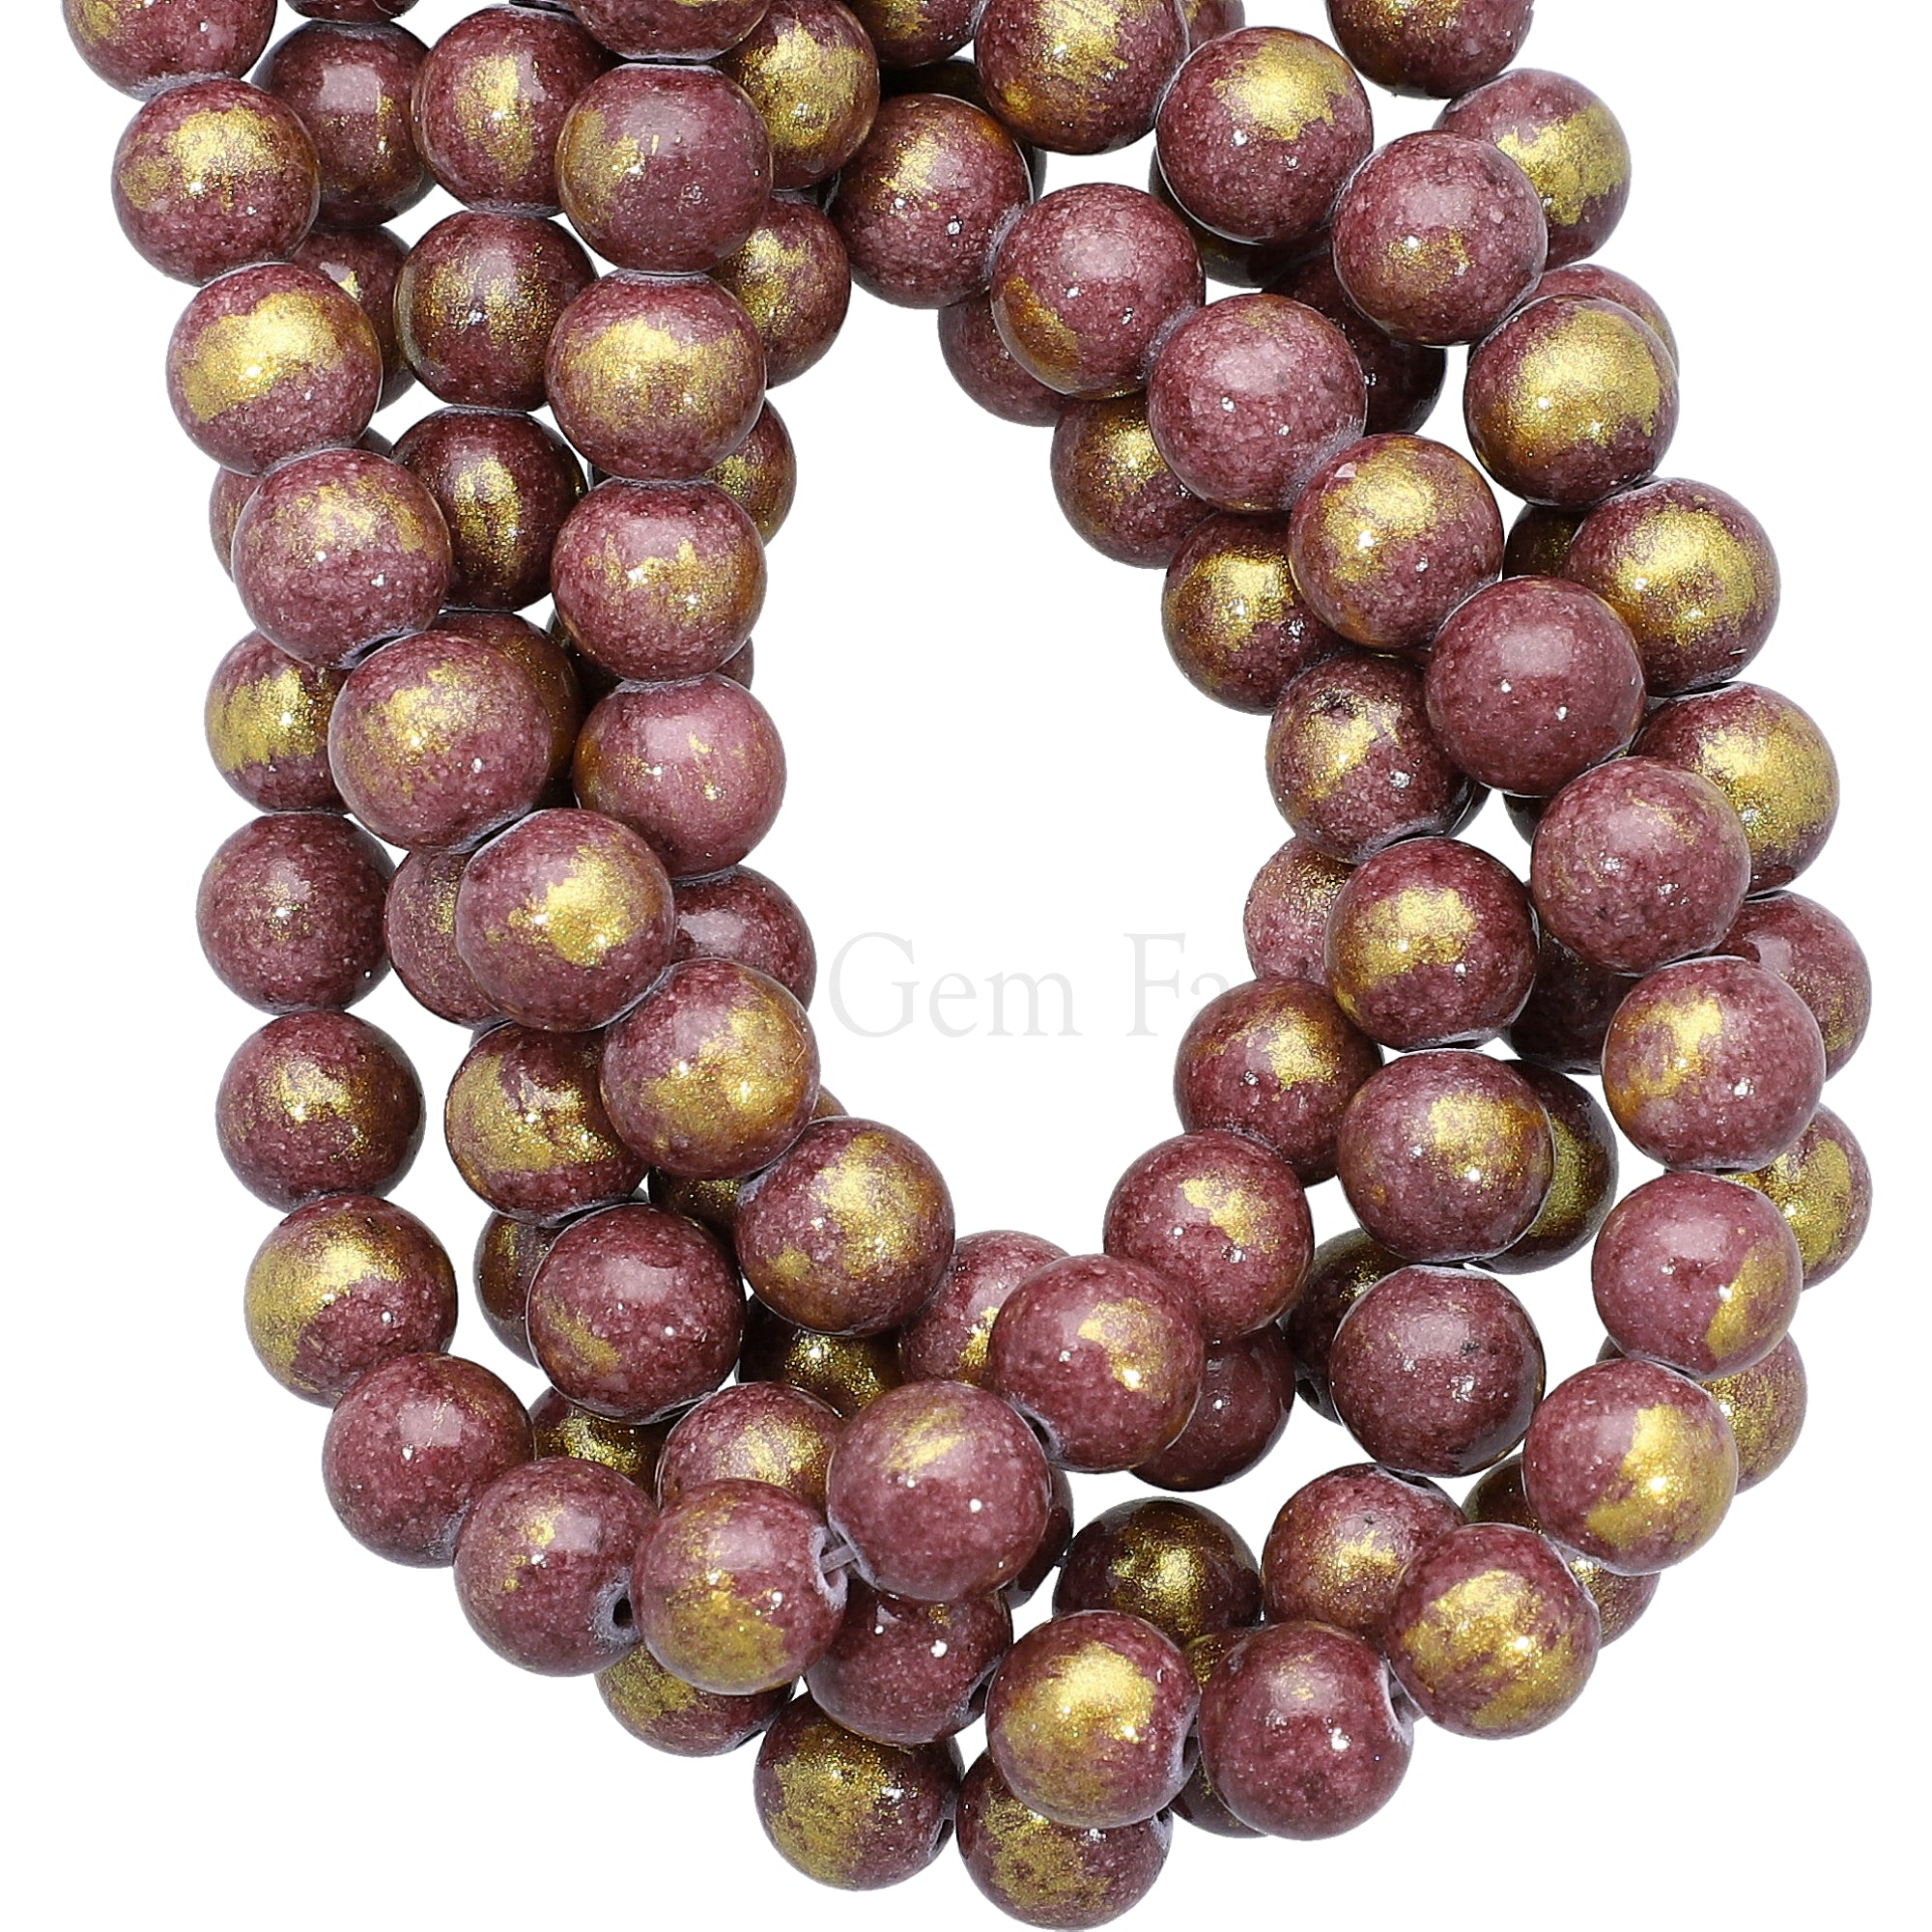 8 MM Golden Leafed Jade Smooth Round Beads 15 Inches Strand